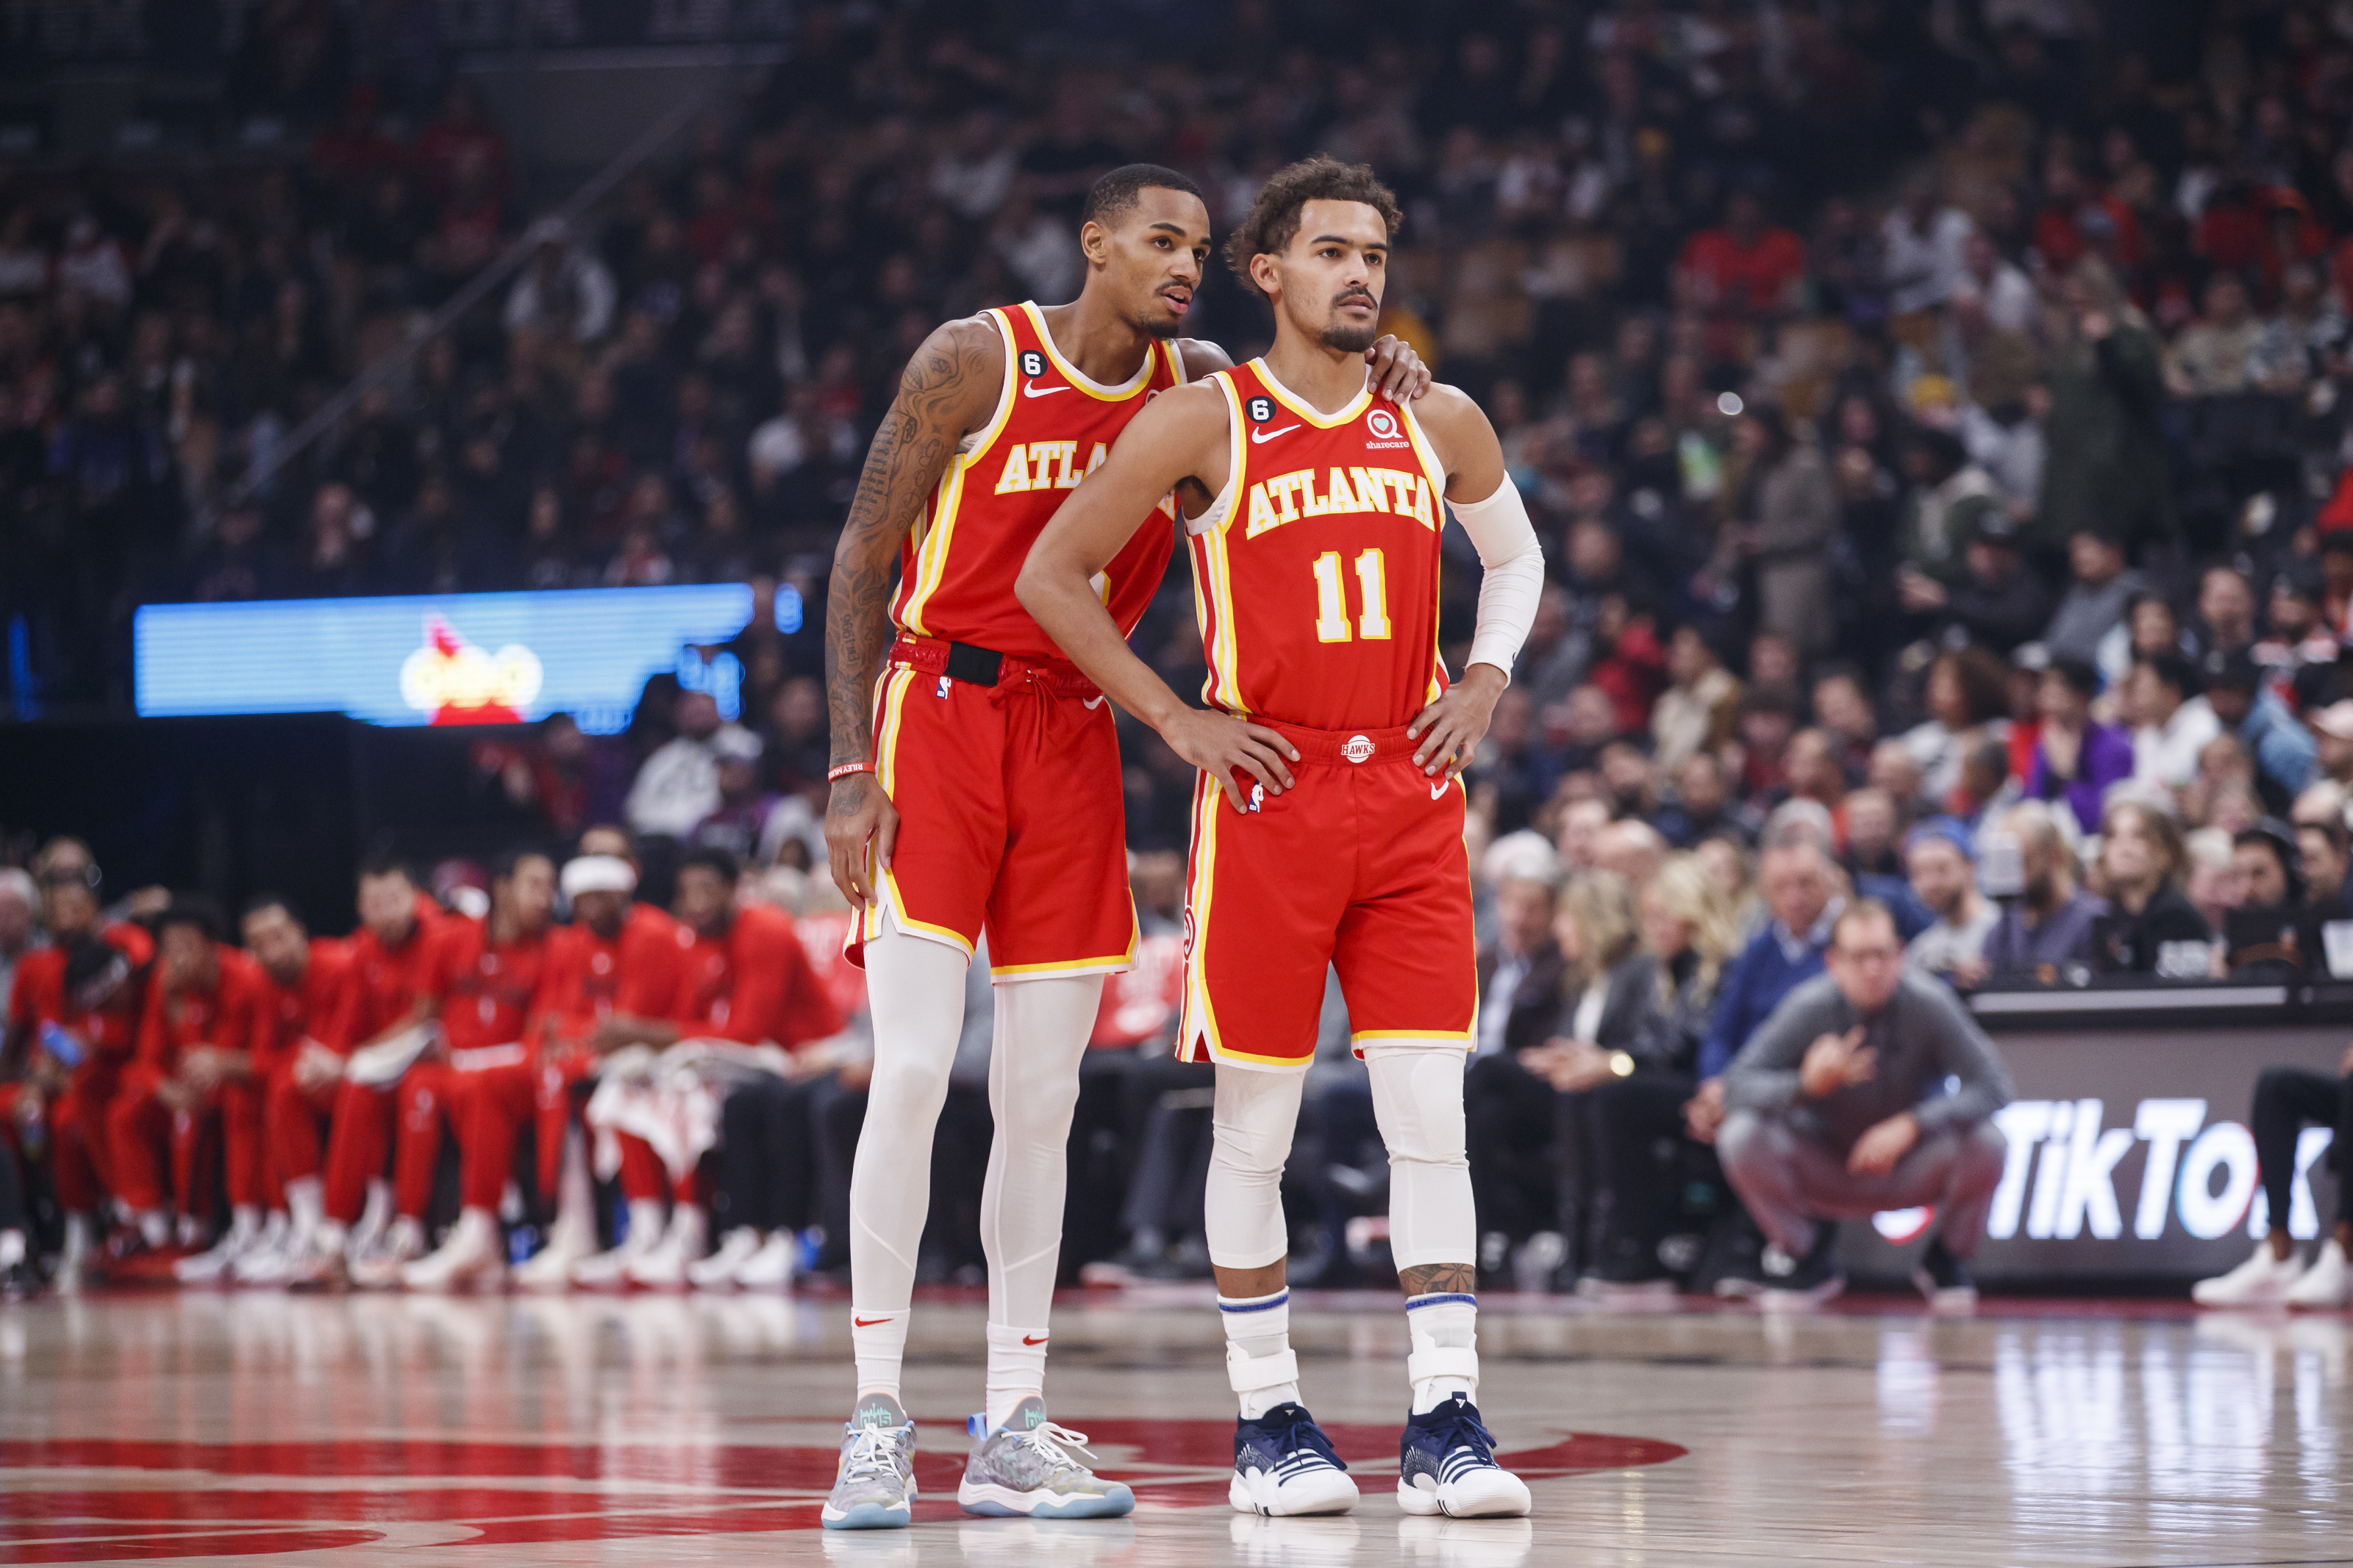 InSnyderWeTrust on X: Why the Hawks pursuit of Pascal Siakam is a